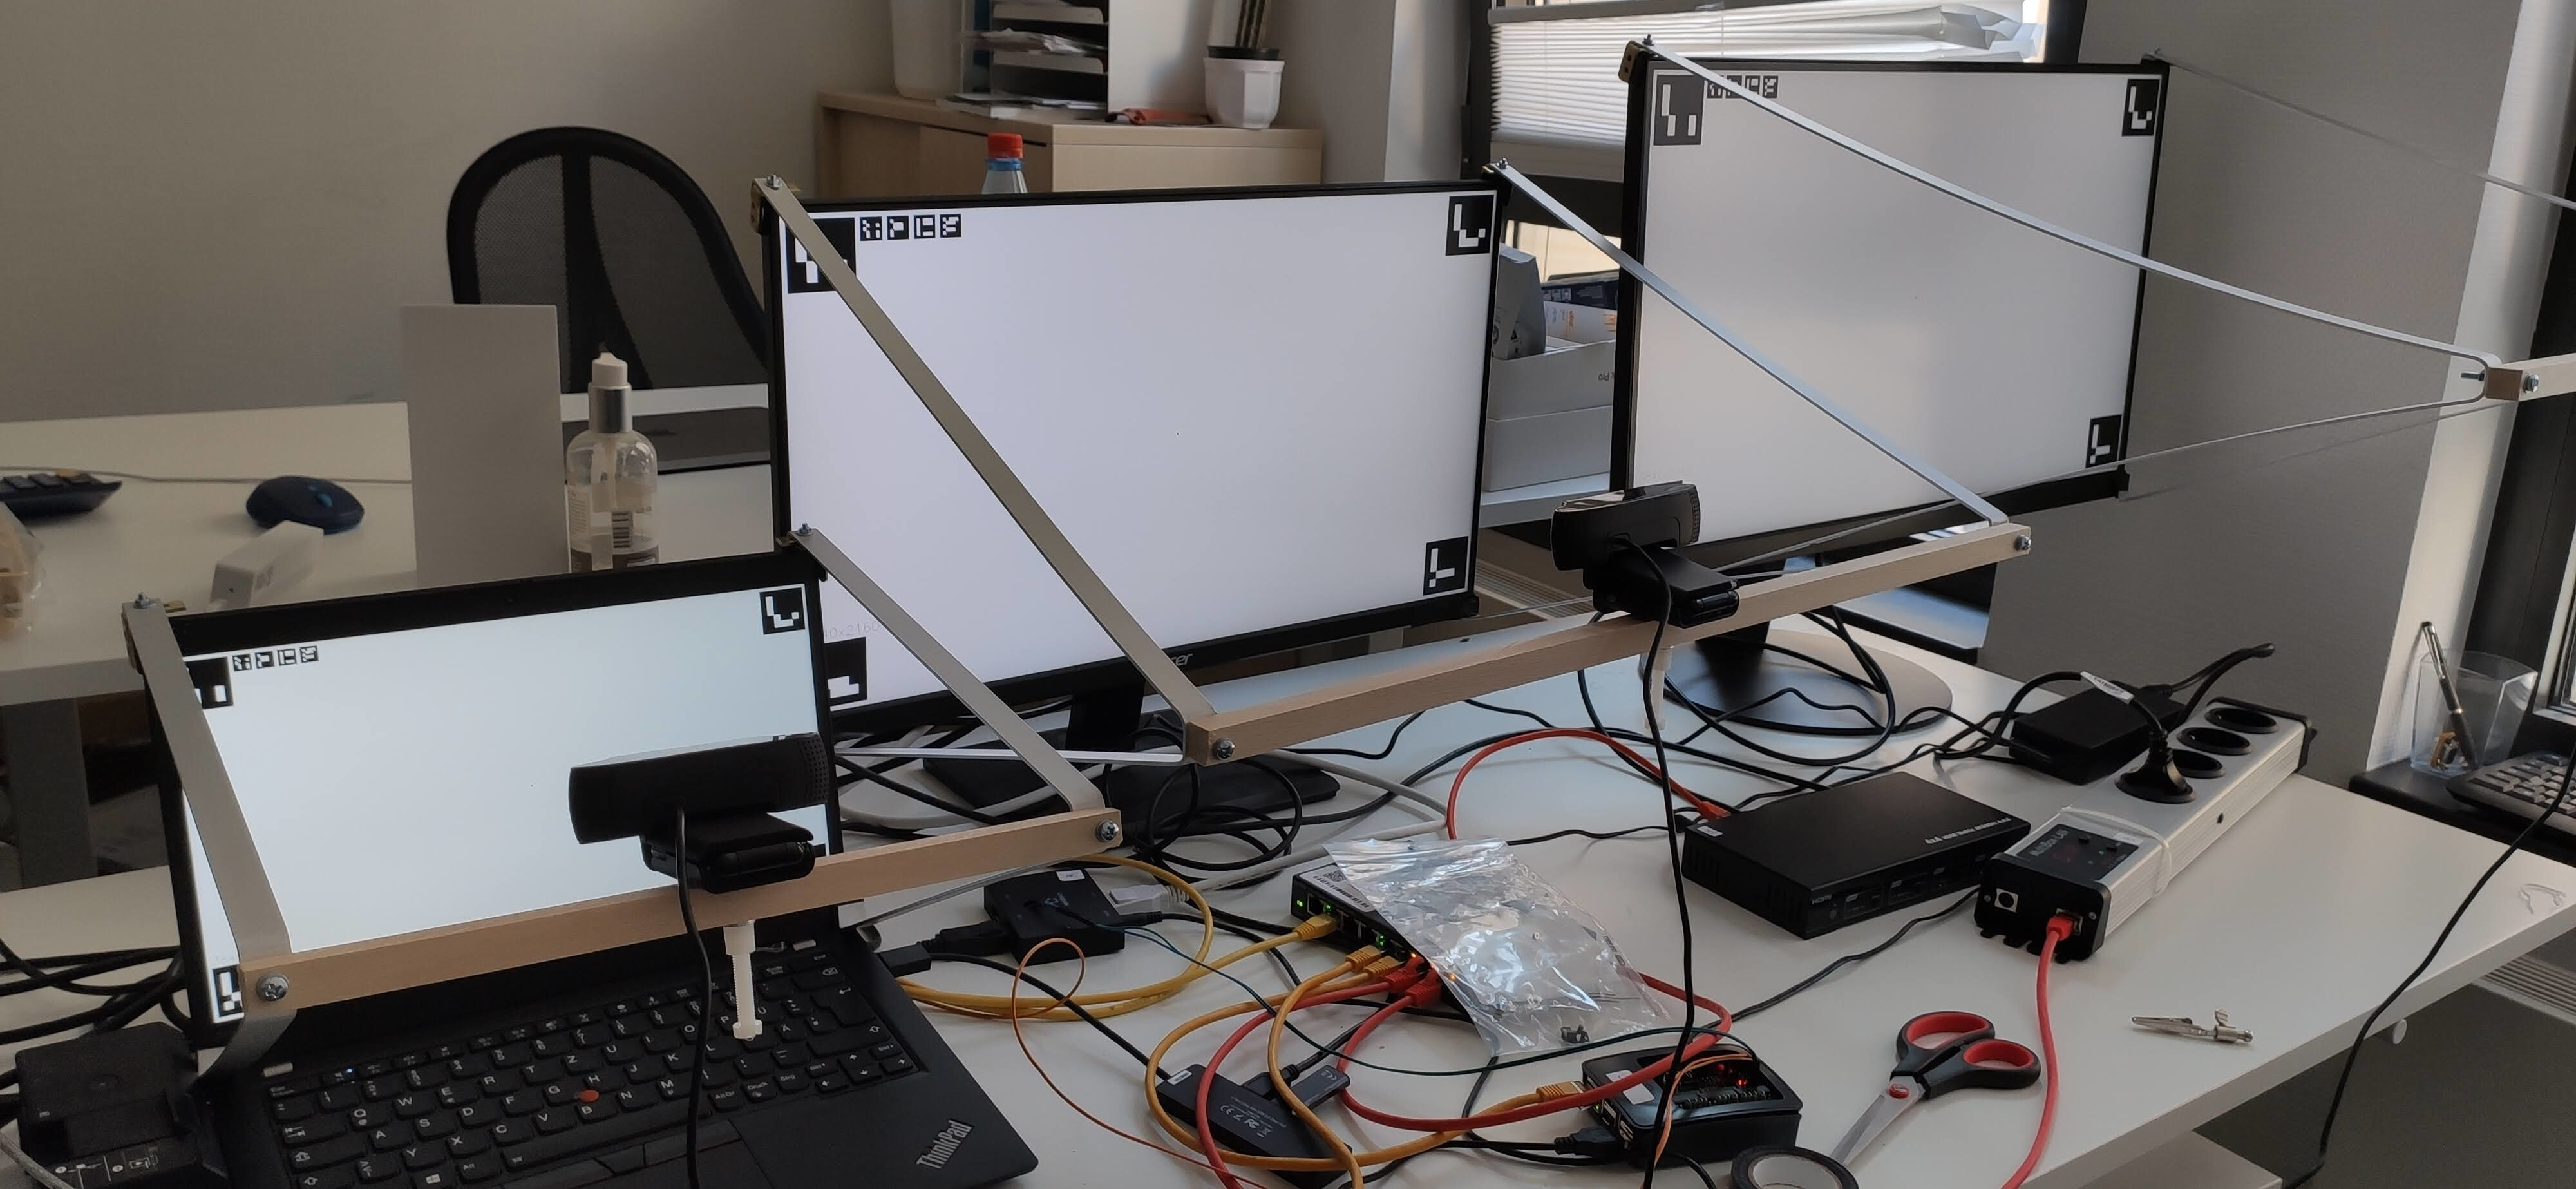 Physical Prototype System and Display Test Setup: The odd part of this project are these hand-crafted display frames that hold the webcams in the right place.